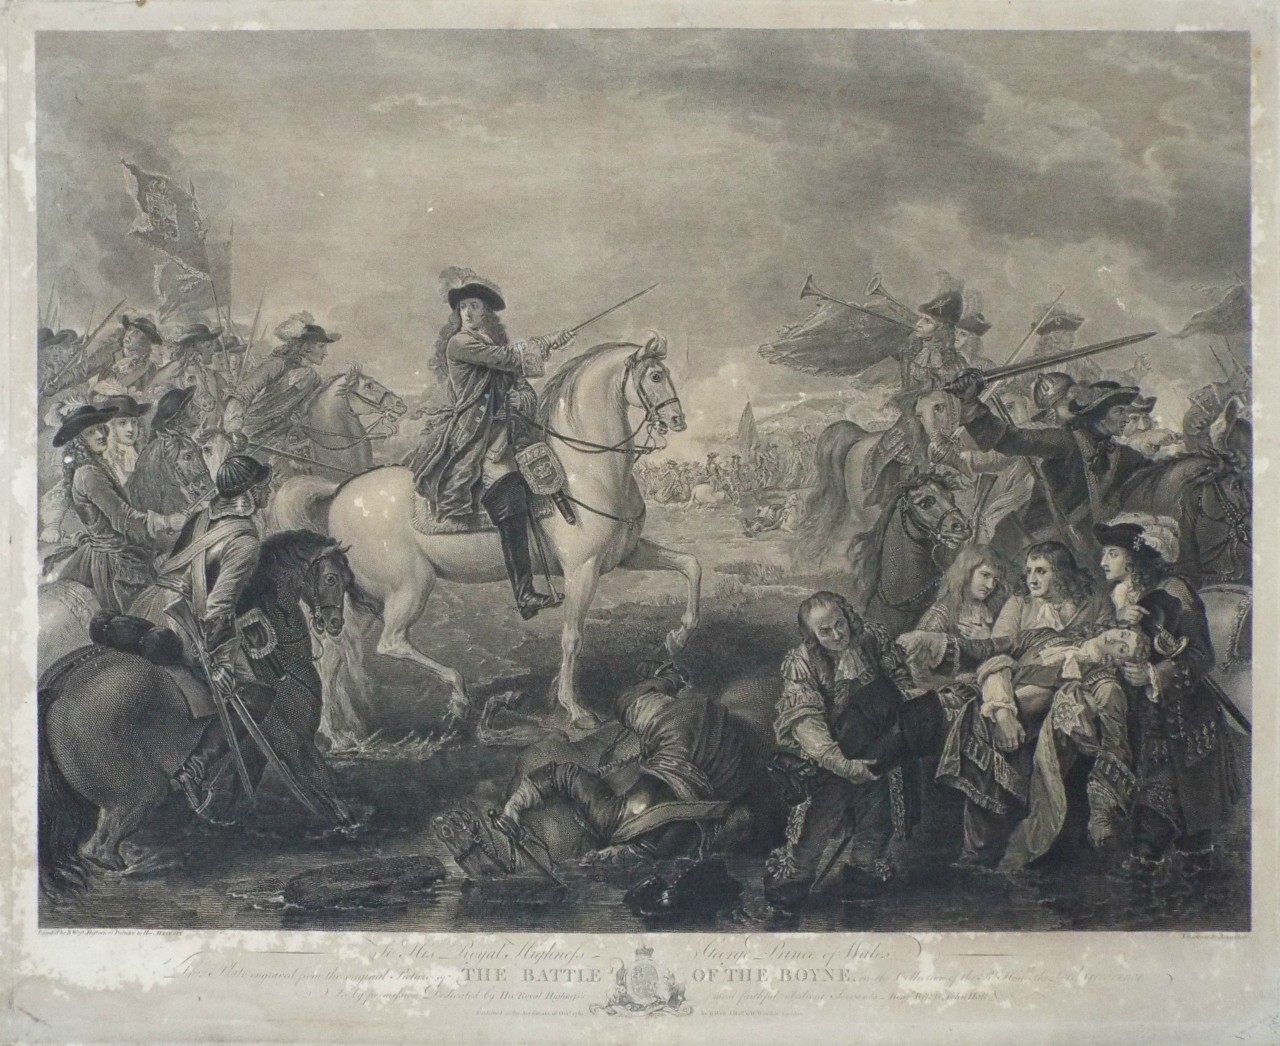 Print - To His Royal Highness George Prince of Wales, This Plate engraved from the original Picture of The Battle of the Boyne, in the Collection of the Rt. Honble. the Lord Grosvenor Is by permission Ddicated by His Royal Highness's most faithful obedient Servants Benn. West & John Hall. - Hall